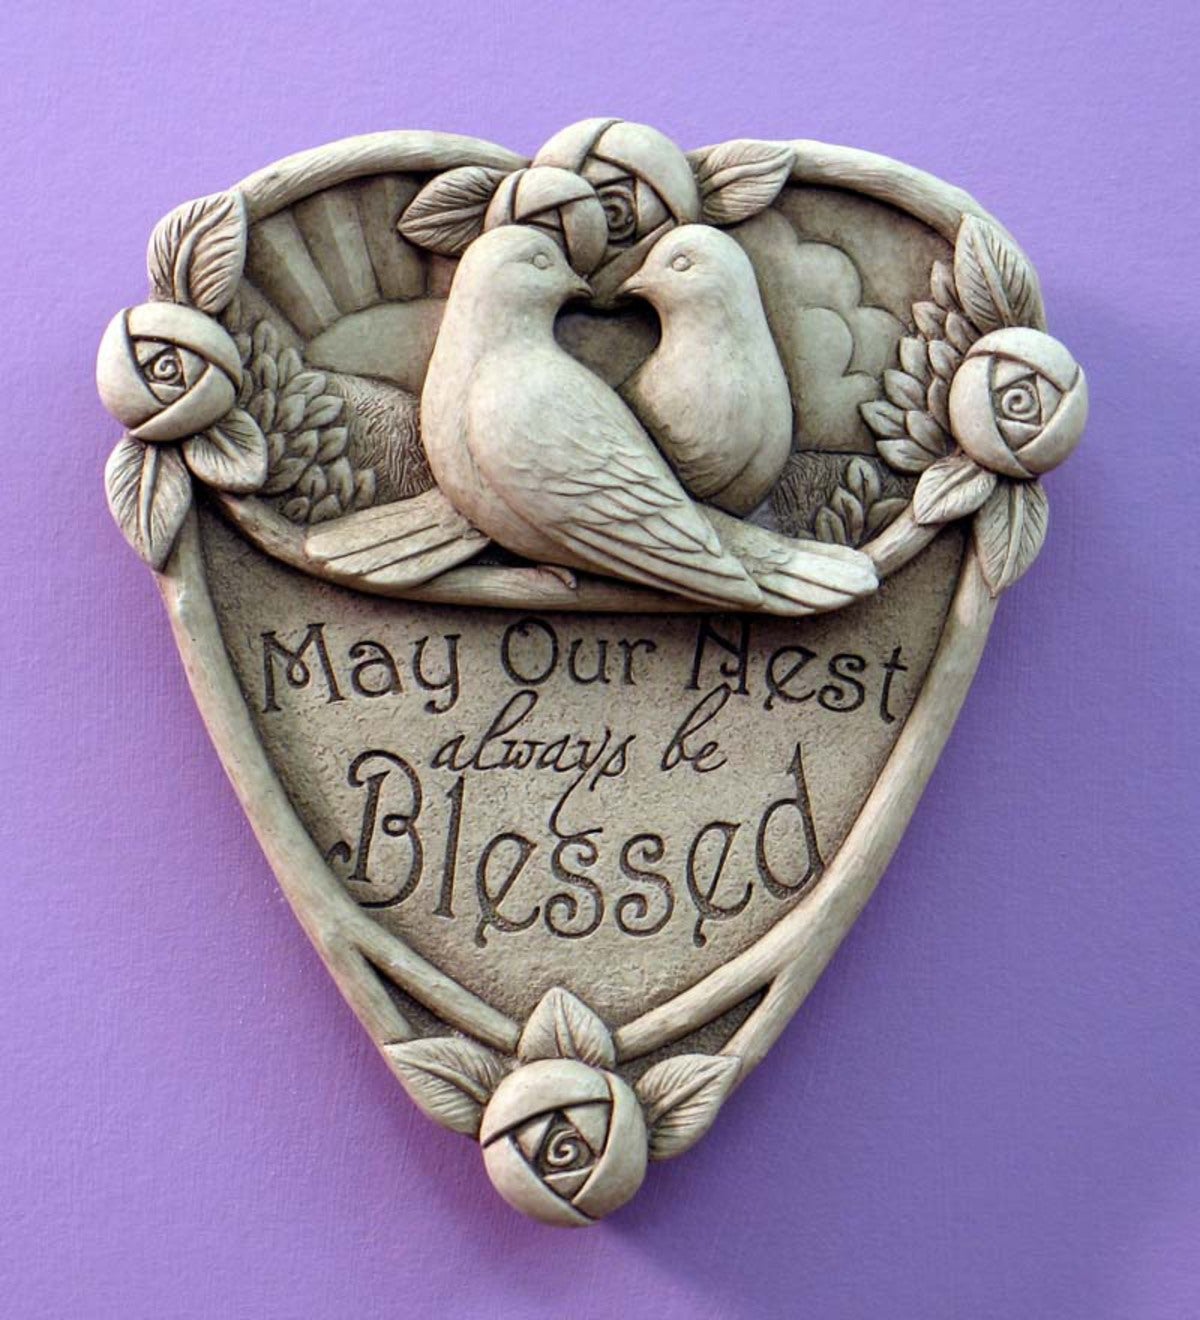 Stone Bless Our Nest Wall Plaque by Carruth Studio